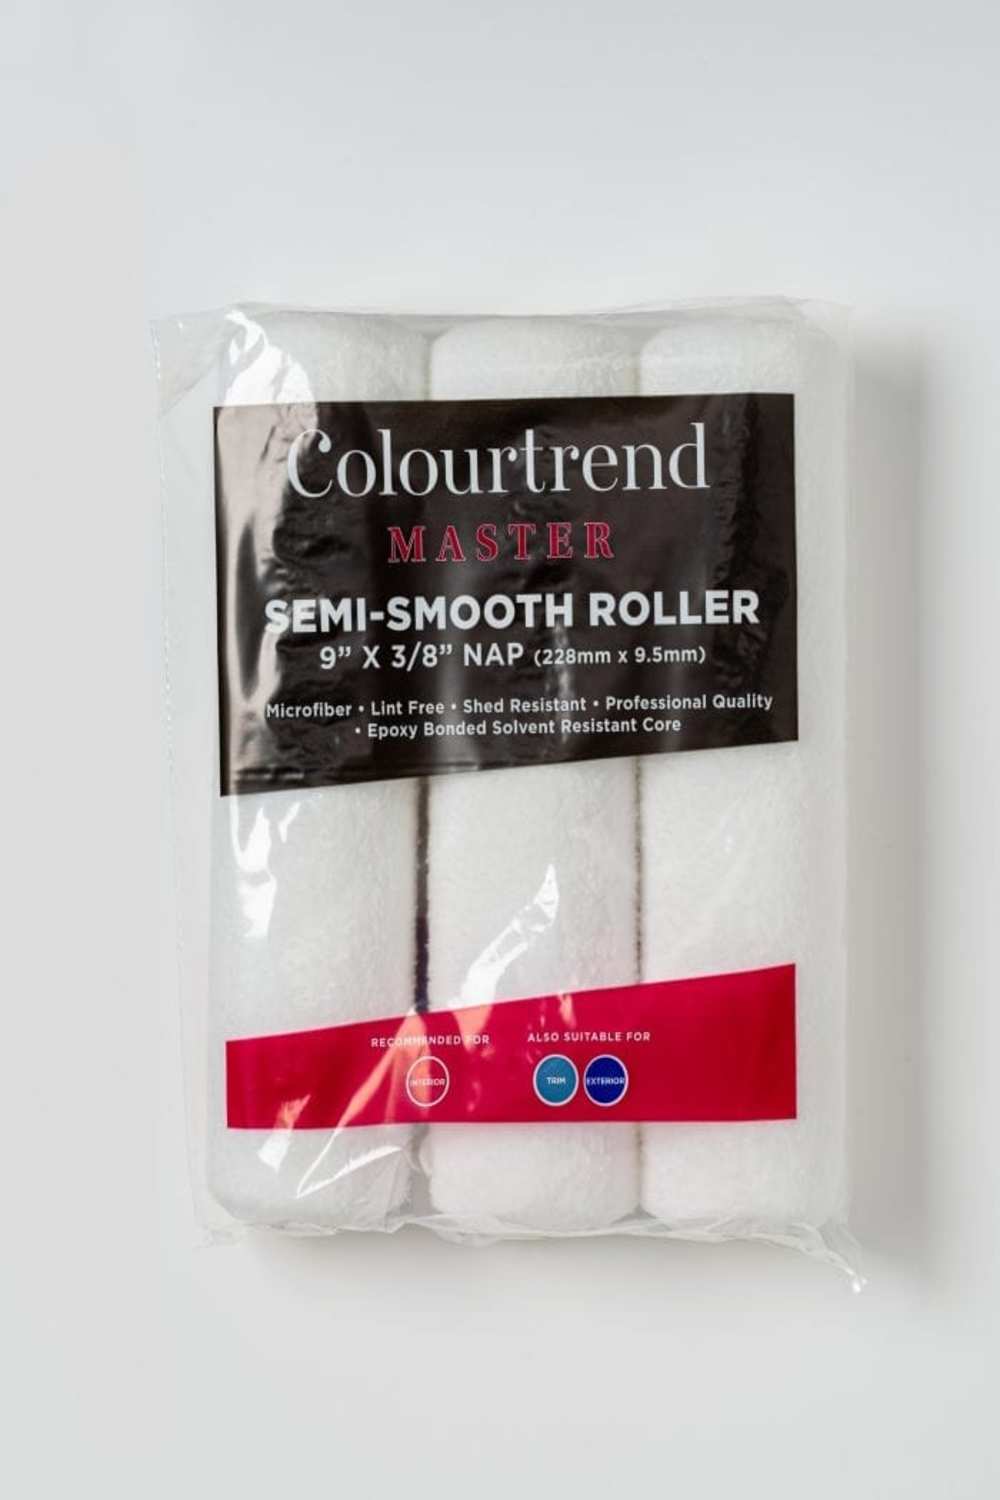 Colourtrend Master 9" X 3/8" Semi-Smooth Roller (3 Pack)